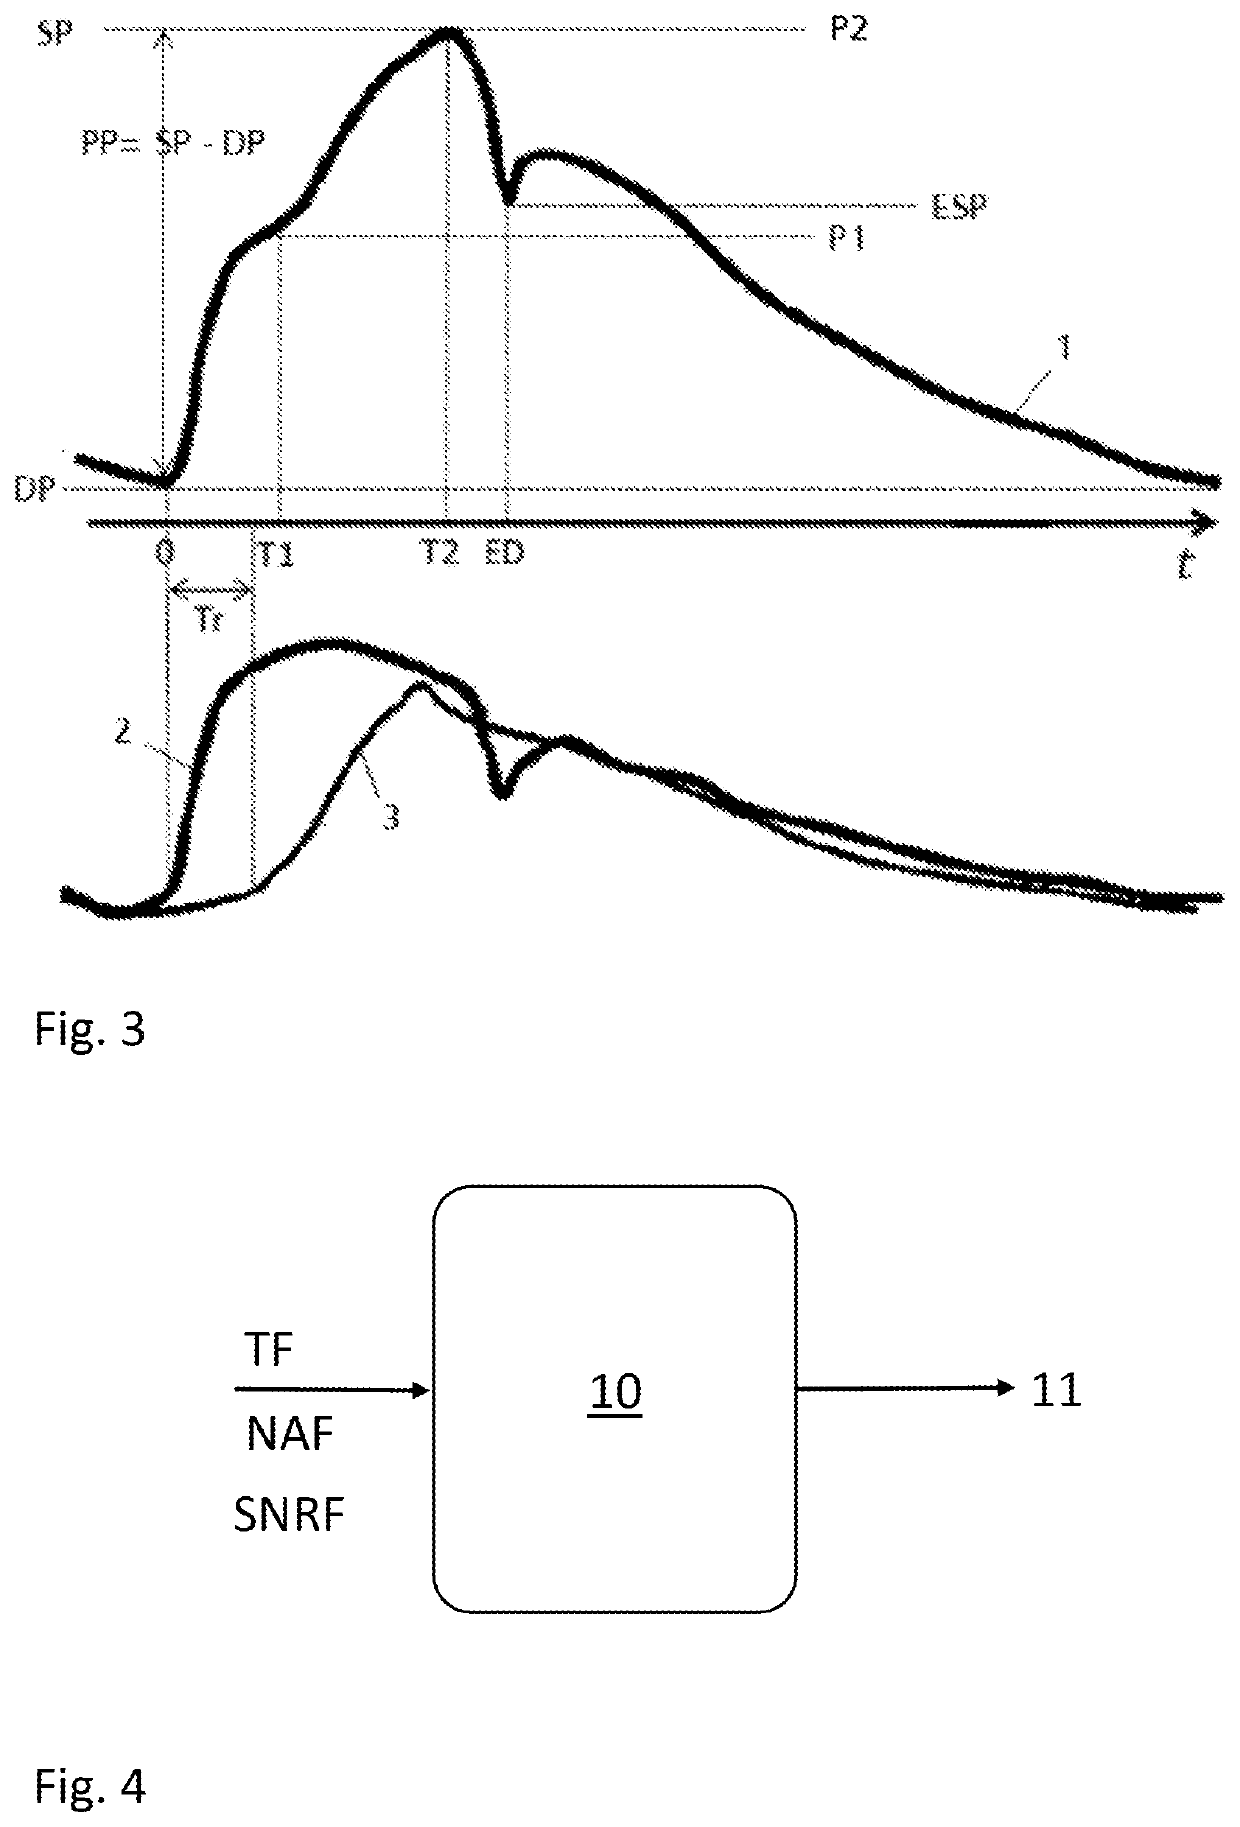 Method for classifying photoplethysmography pulses and monitoring of cardiac arrhythmias